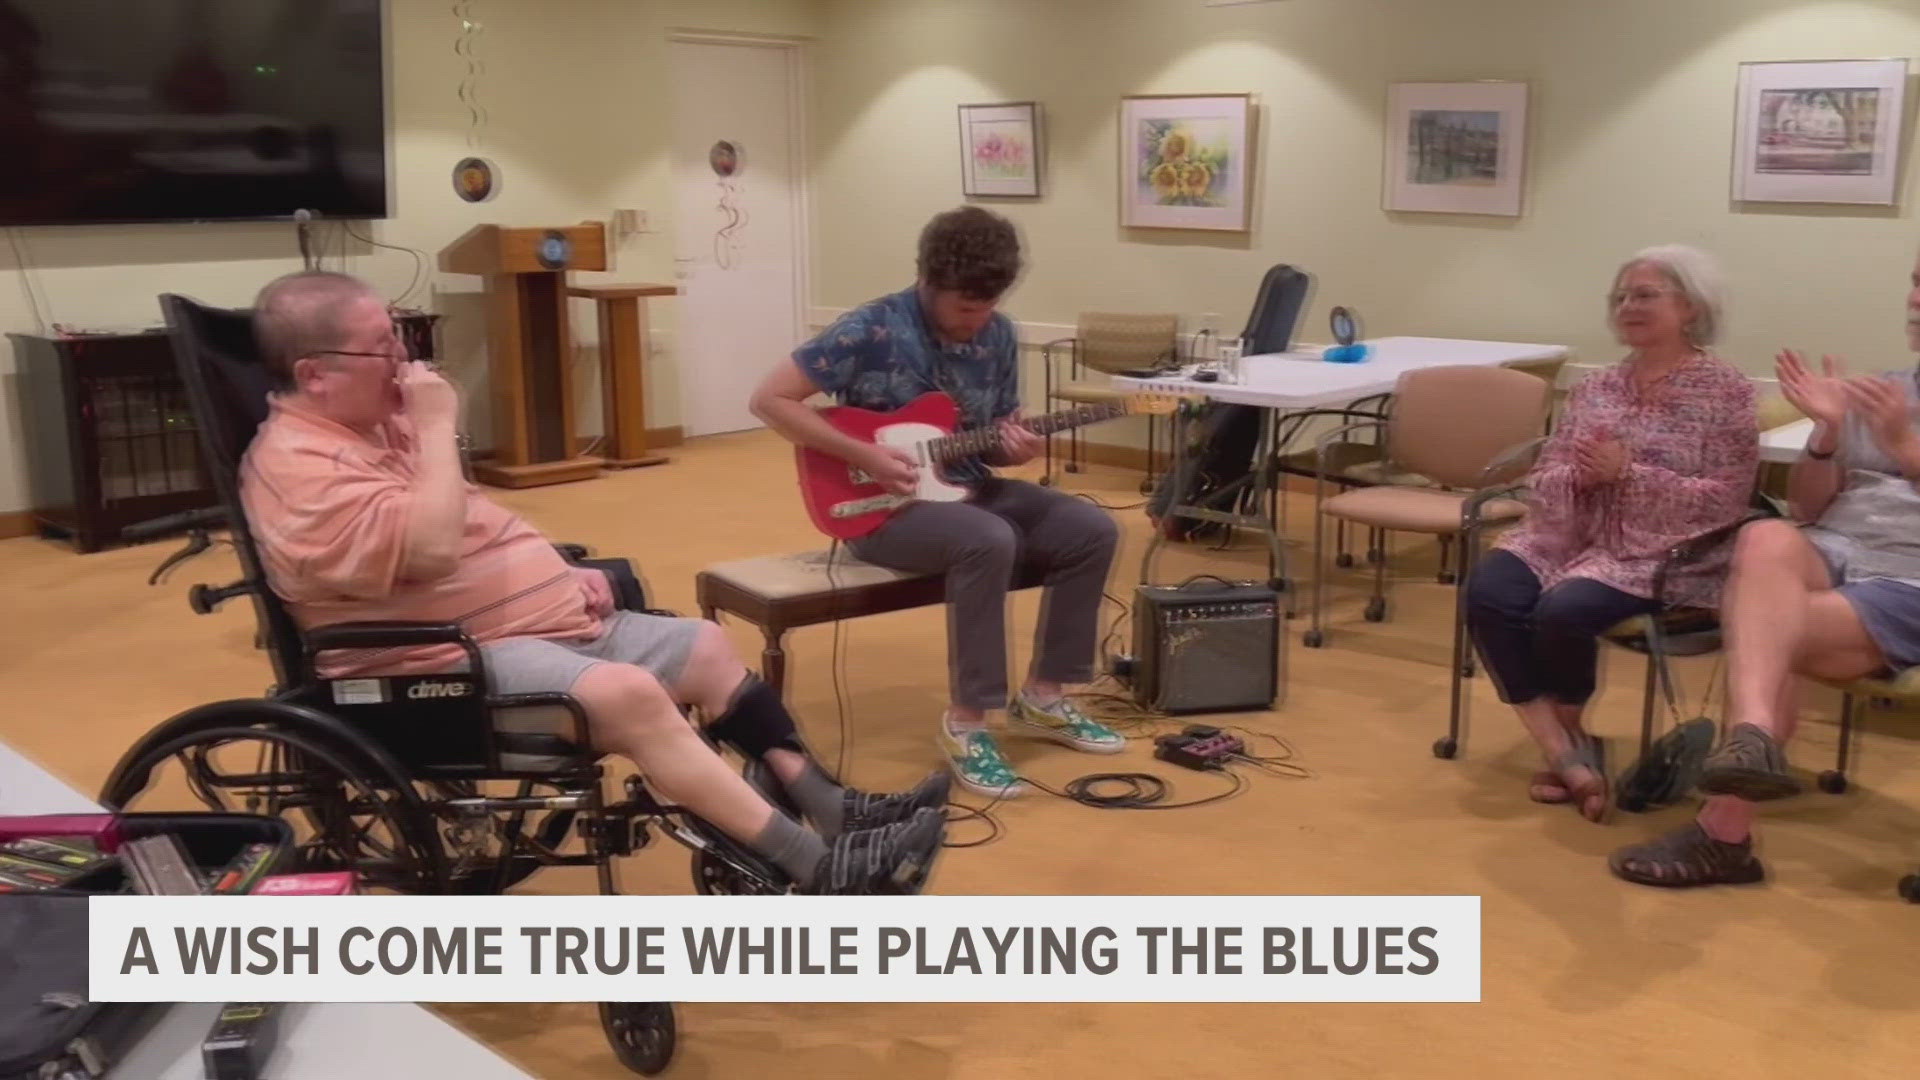 A hospice patient in West Michigan got a special wish fulfilled while playing harmonica with his family.